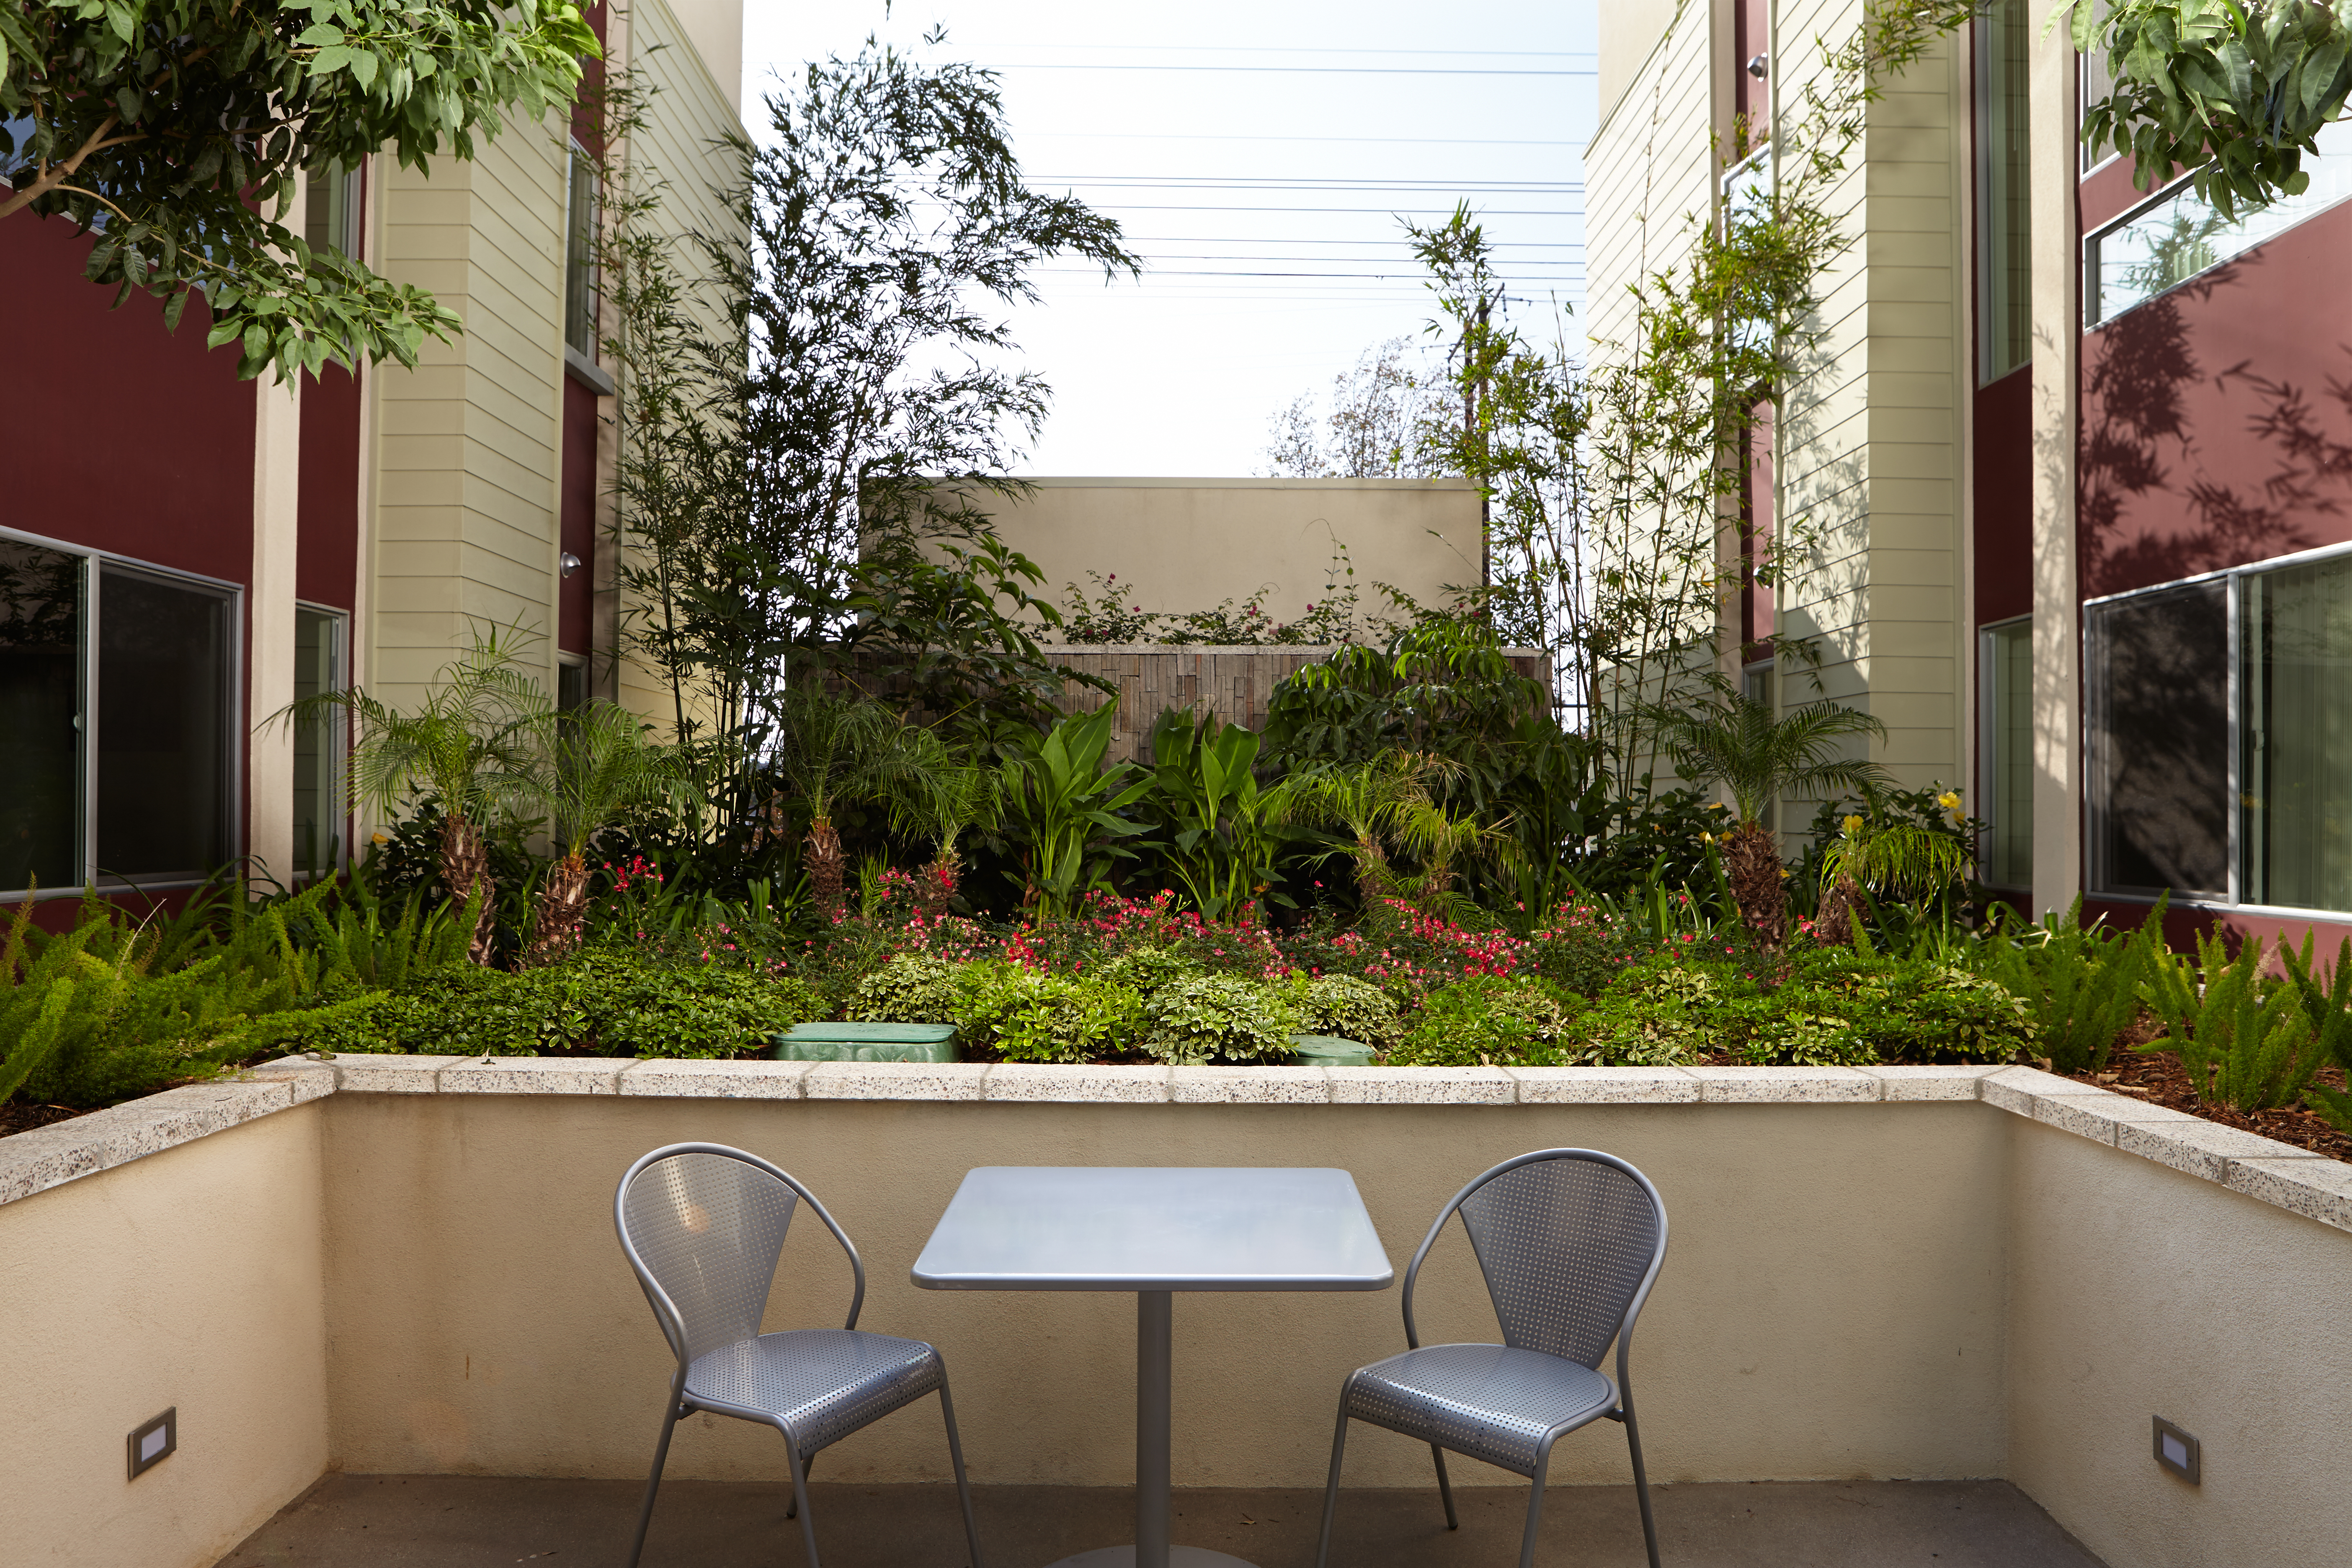 Front view of an outdoor seating area, small square table with two chairs, plants and flower beds behind.